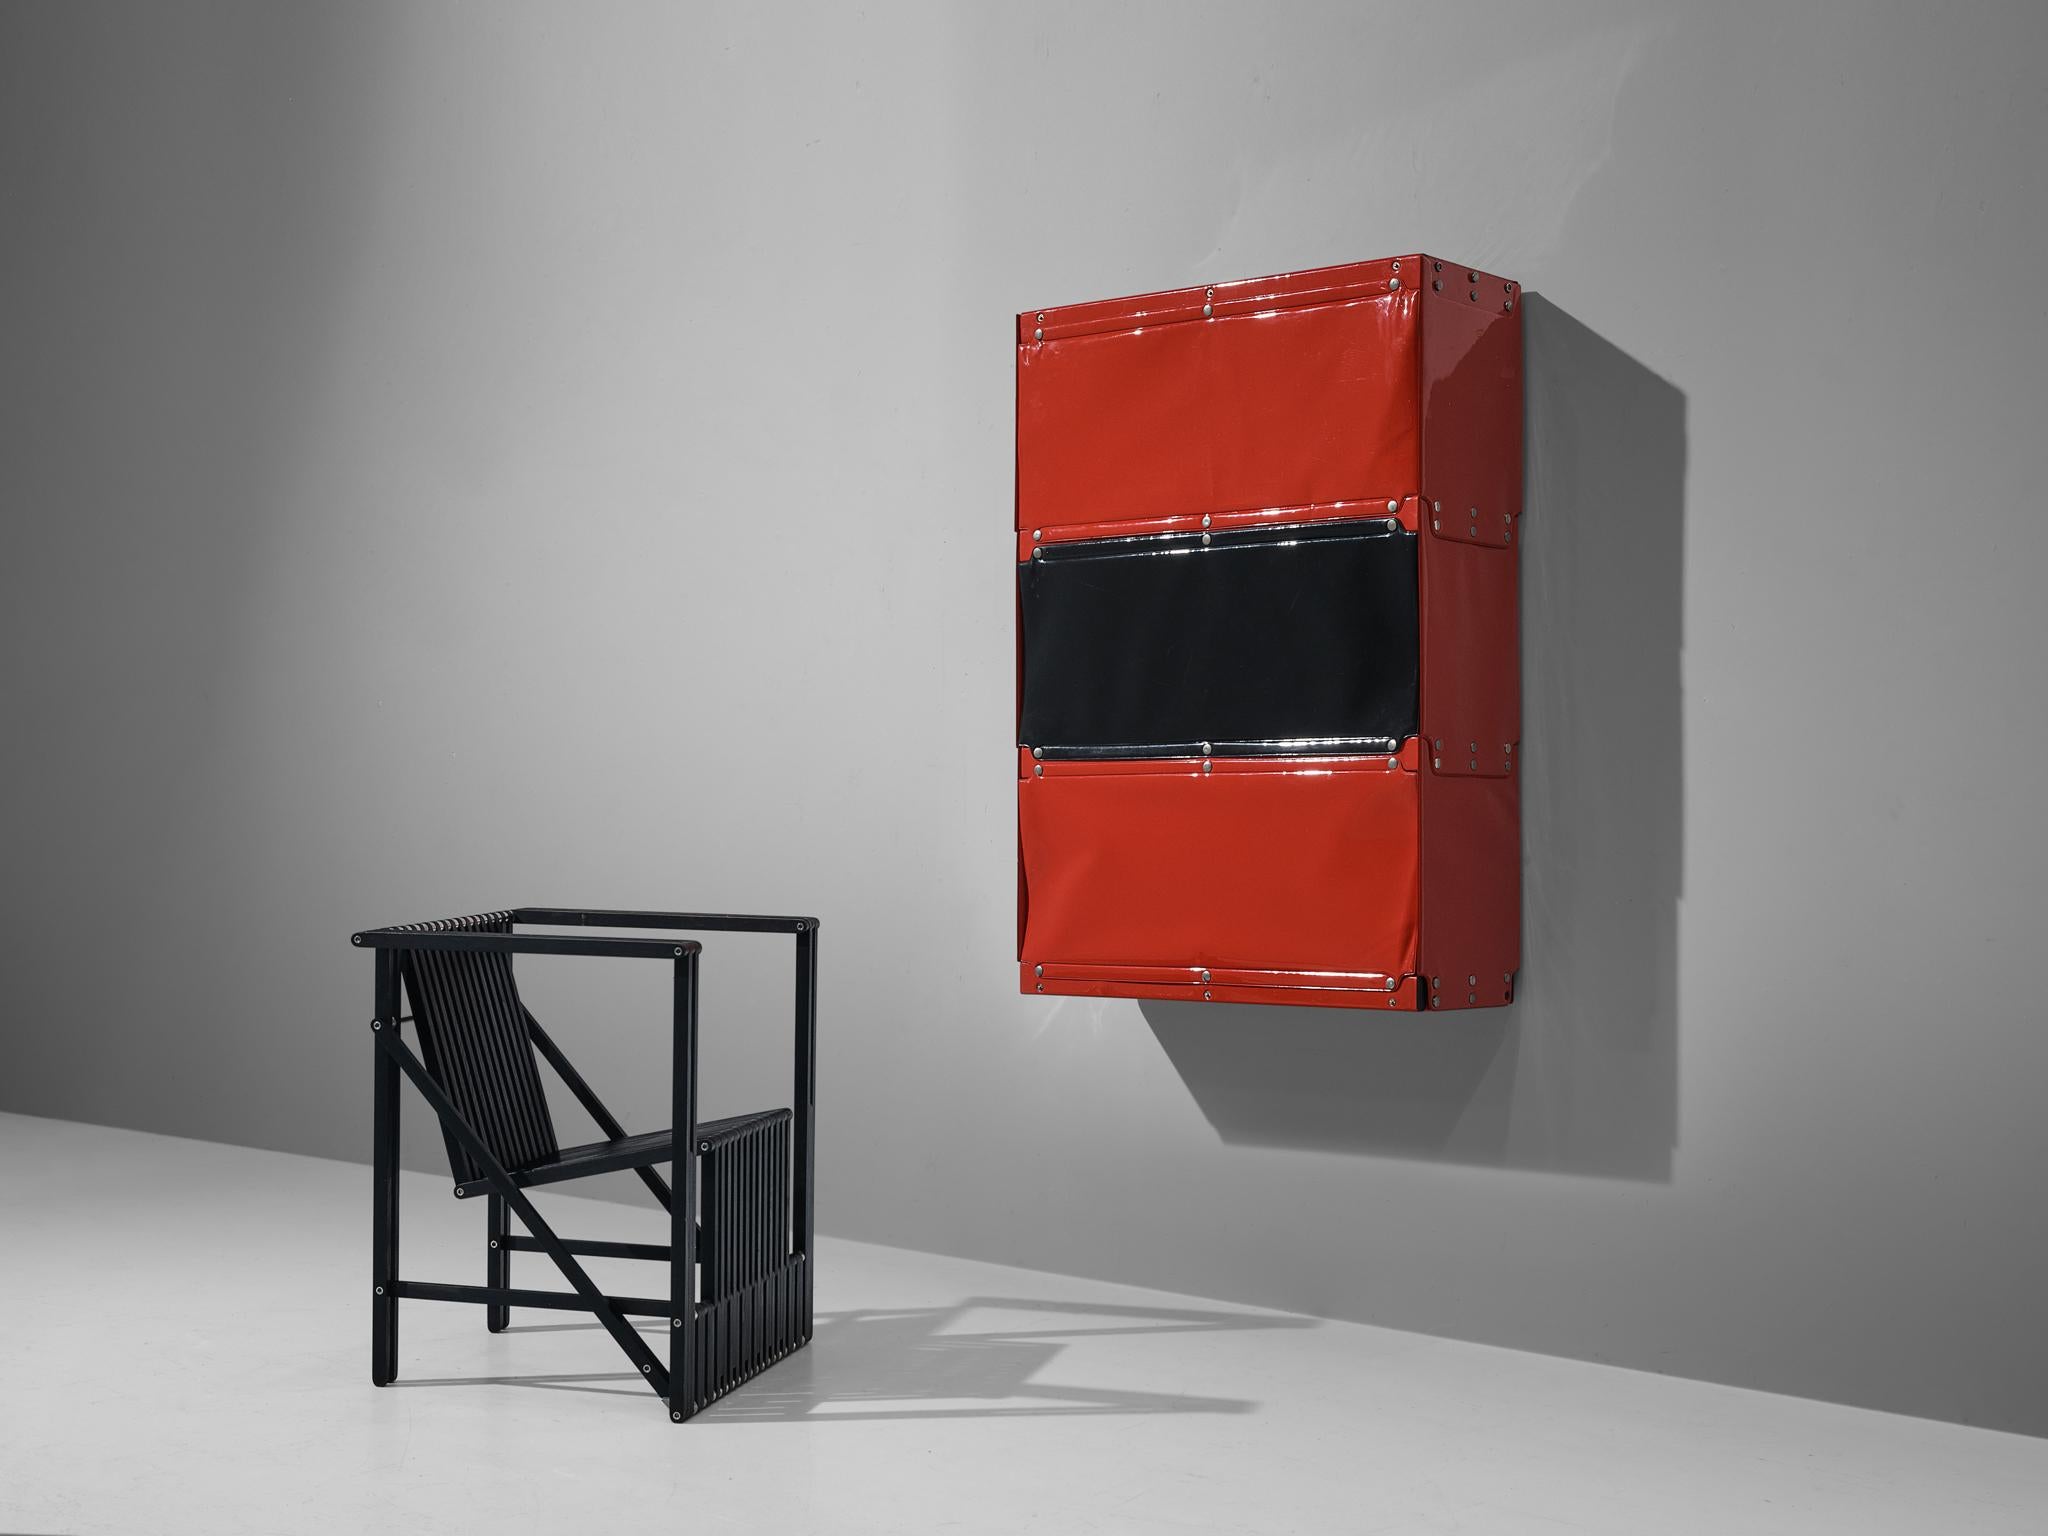 German Rare Otto Zapf 'Softline' Wall-Mounted Cabinets in Red and Black for Zapfdesign